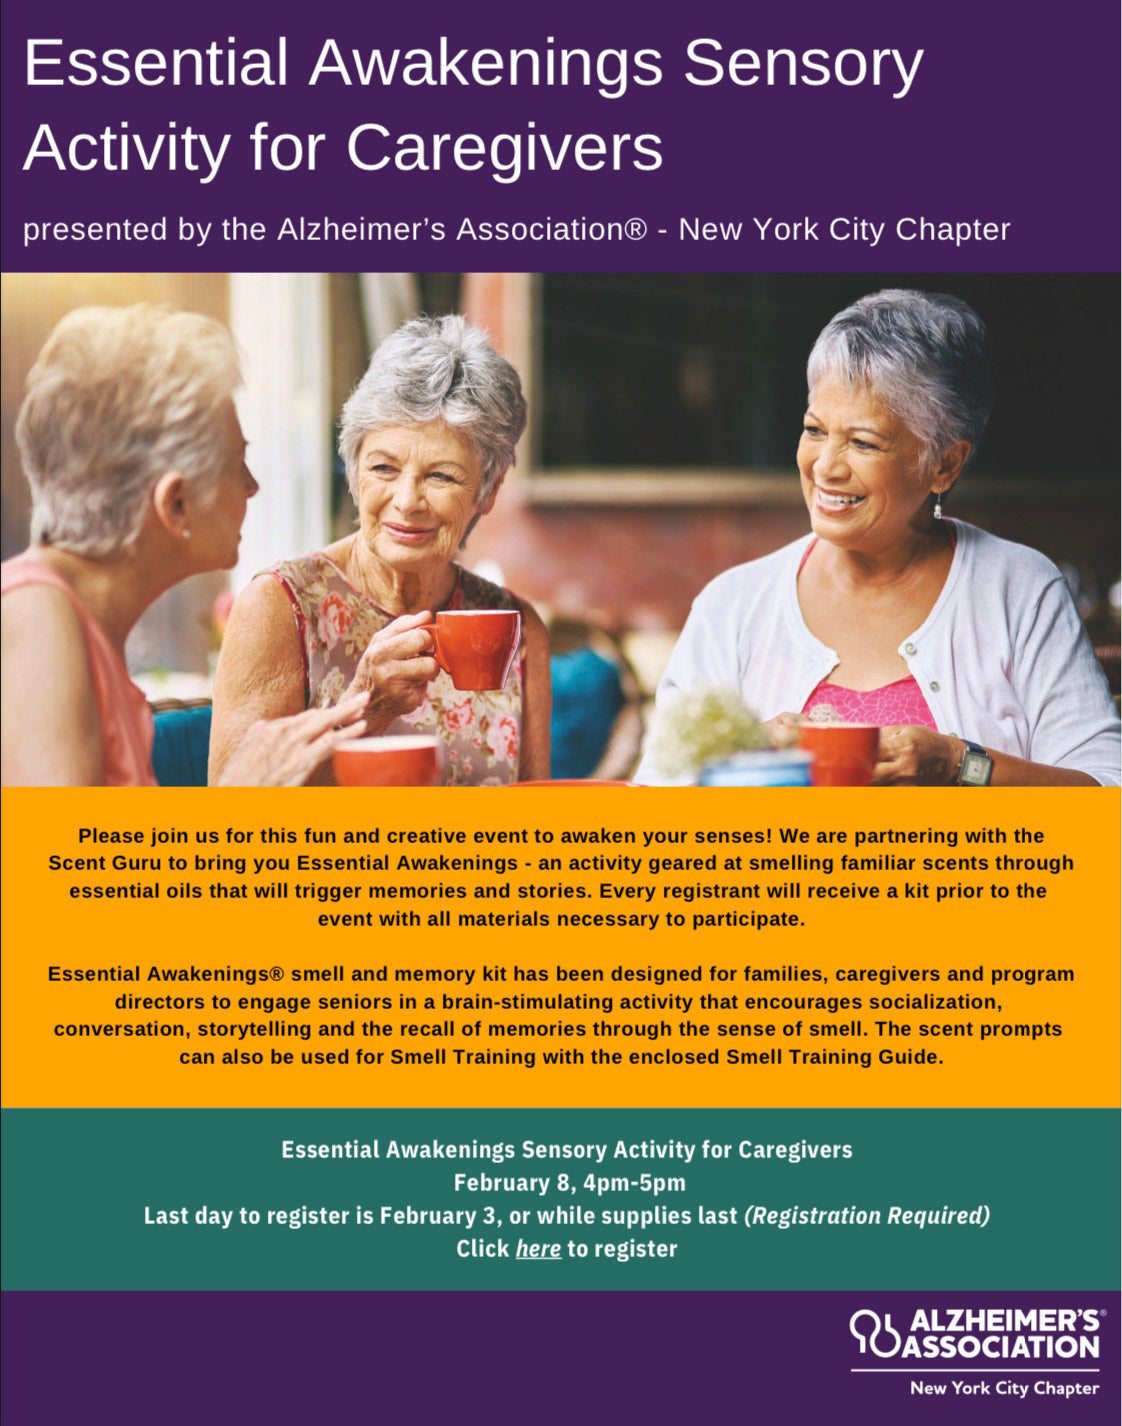 Feedback From Caregivers As Reported By The Alzheimer's Association of New York City Chapter